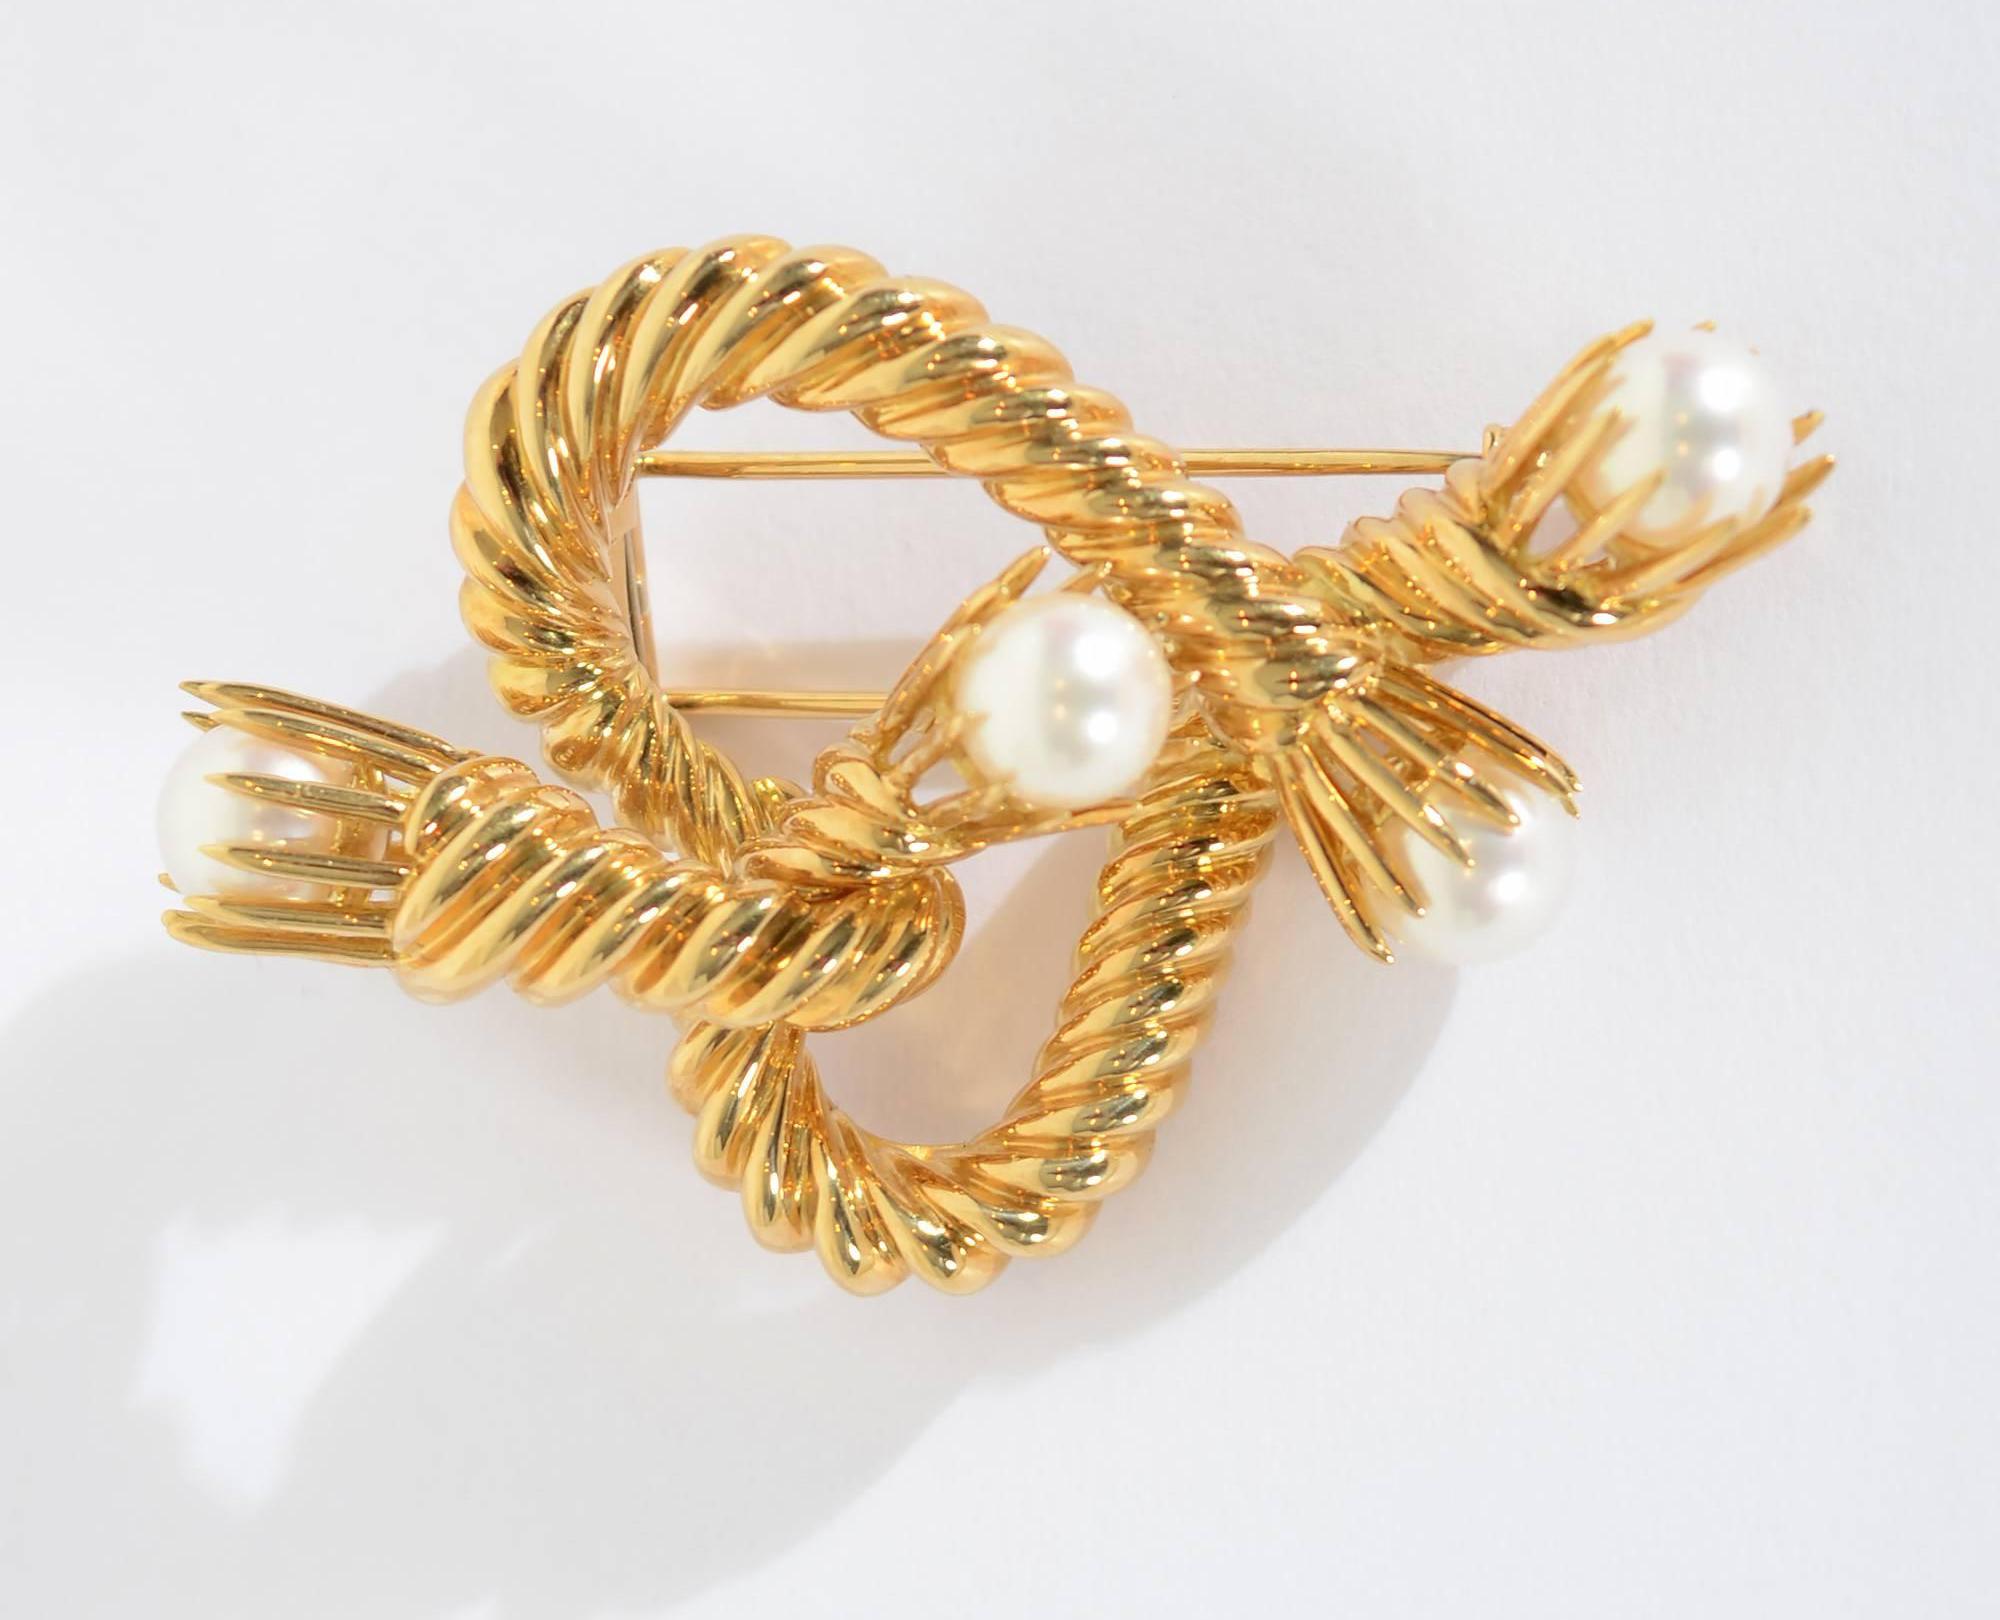 Wonderful abstracted heart brooch by Jean Schlumberger for Tiffany of twisted gold rope terminating with pearls.Schlumberger was known as 